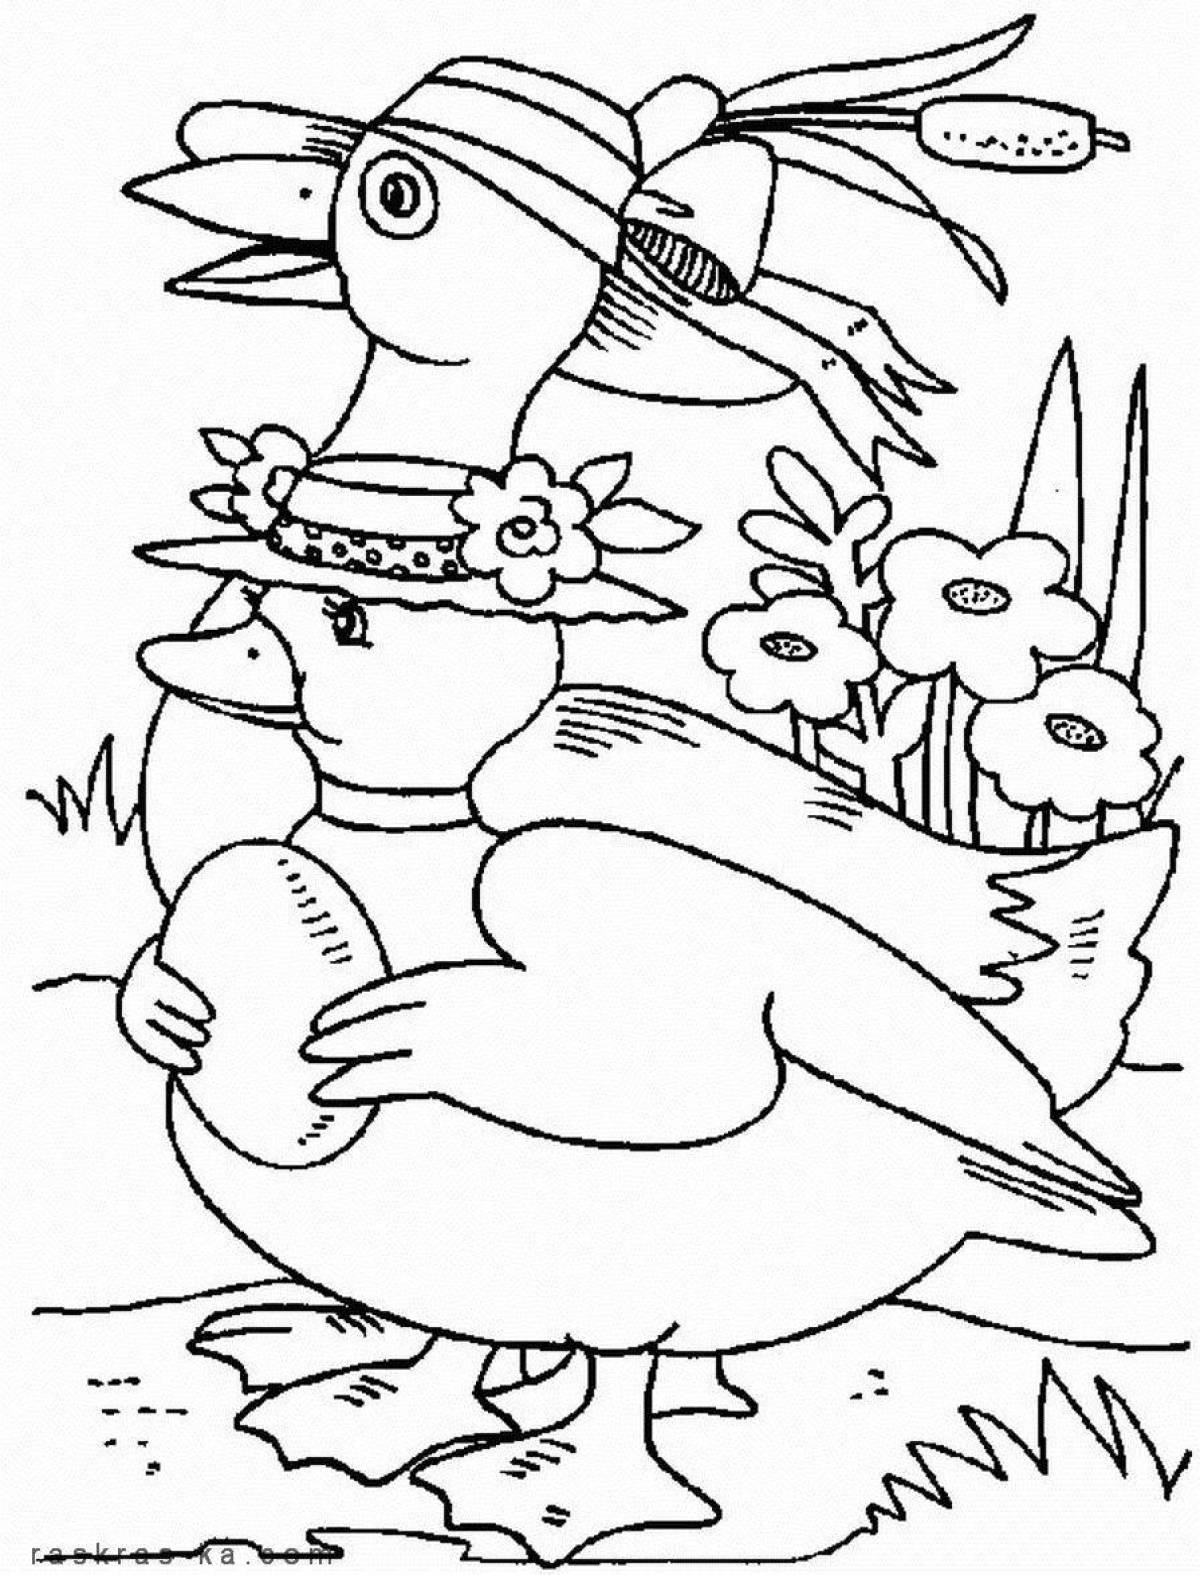 Lolofan duck coloring page full of color